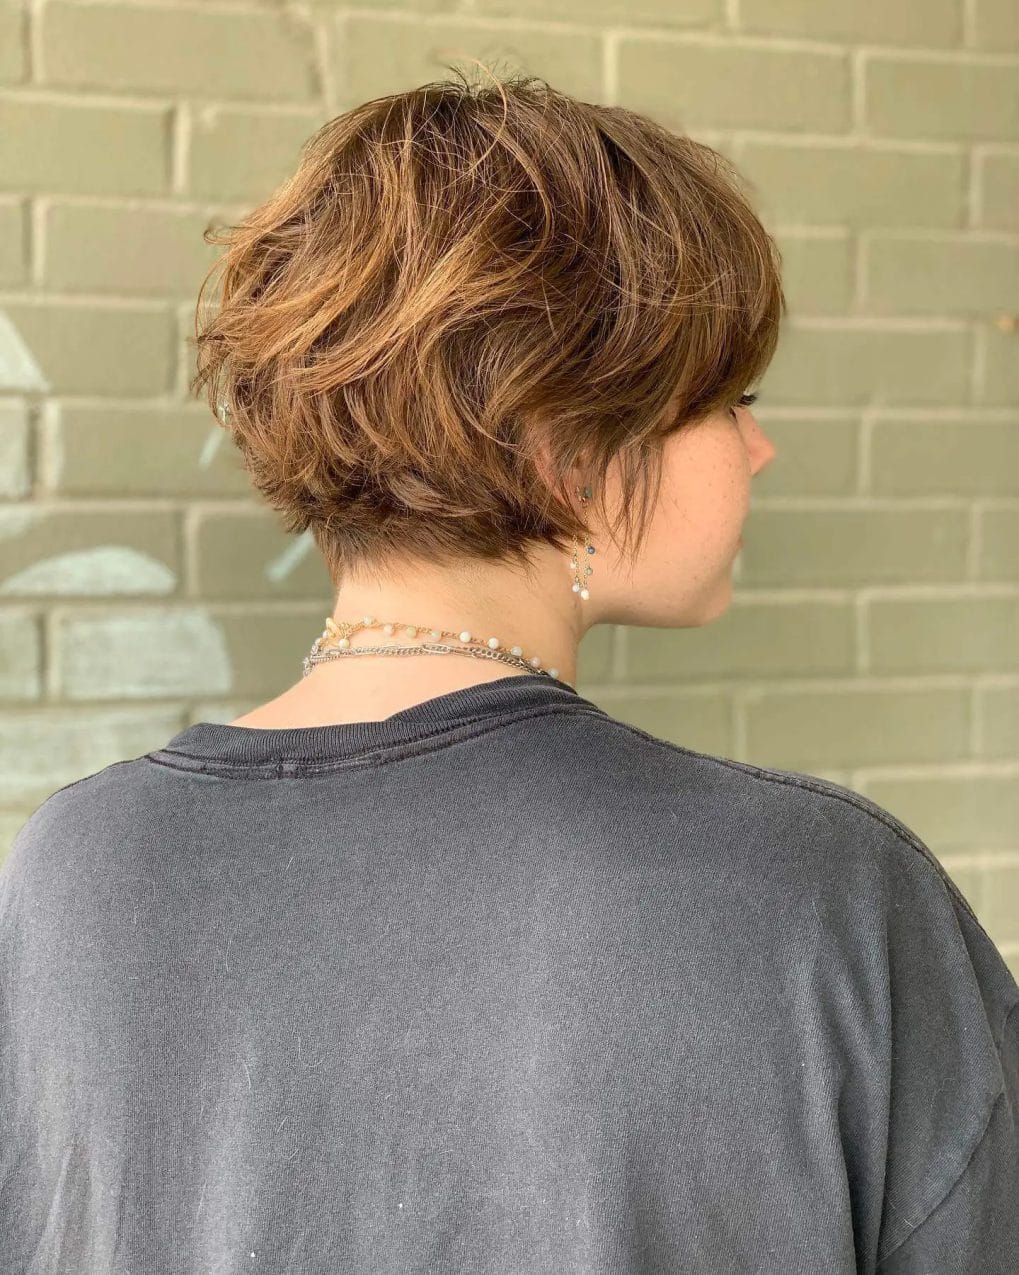 Layered bixie in light brown with a tousled look, shorter at the nape growing longer toward the face.